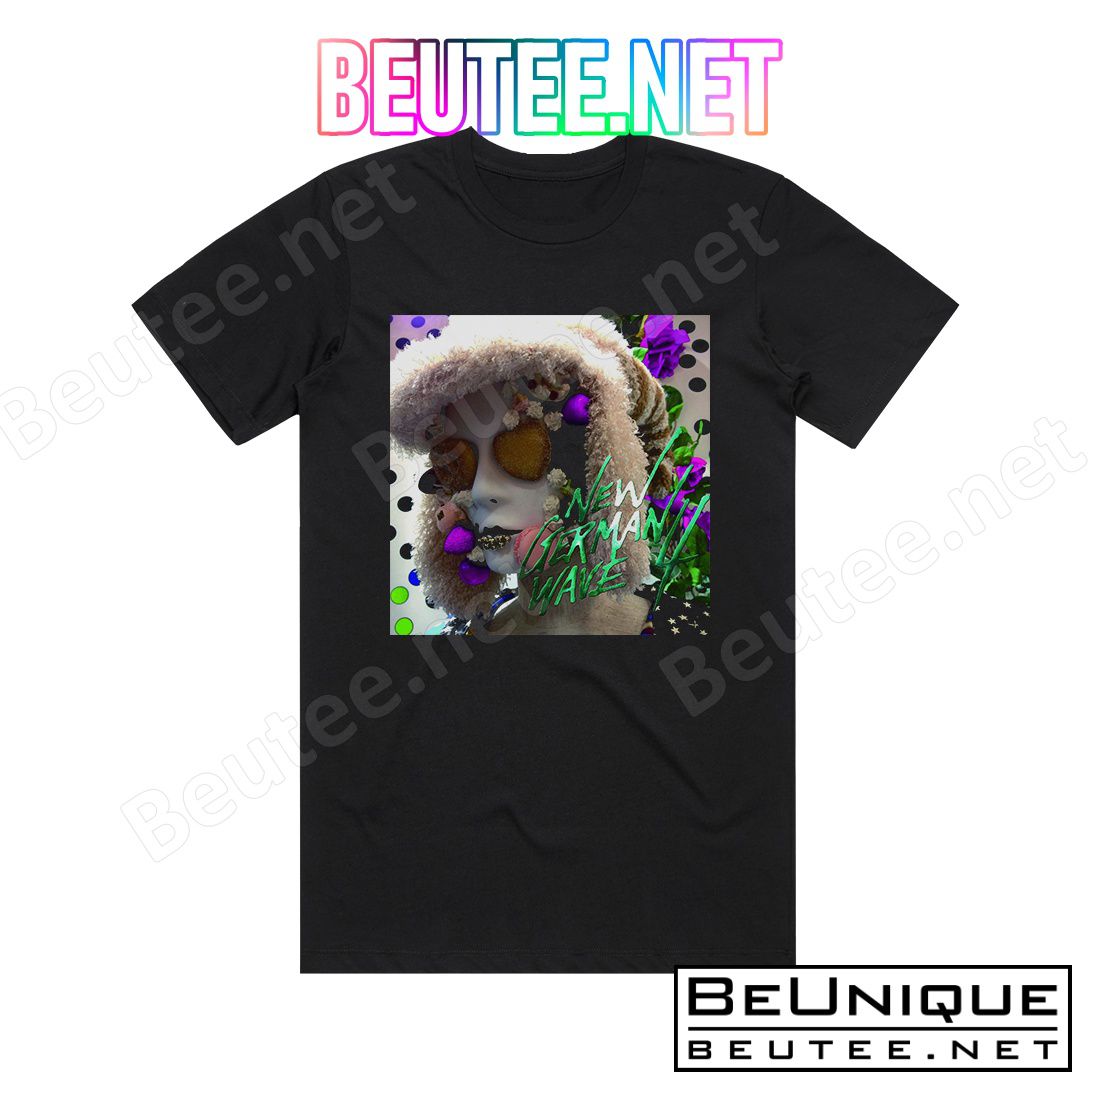 08 Byou to Shougeki New German Wave 4 Album Cover T-Shirt